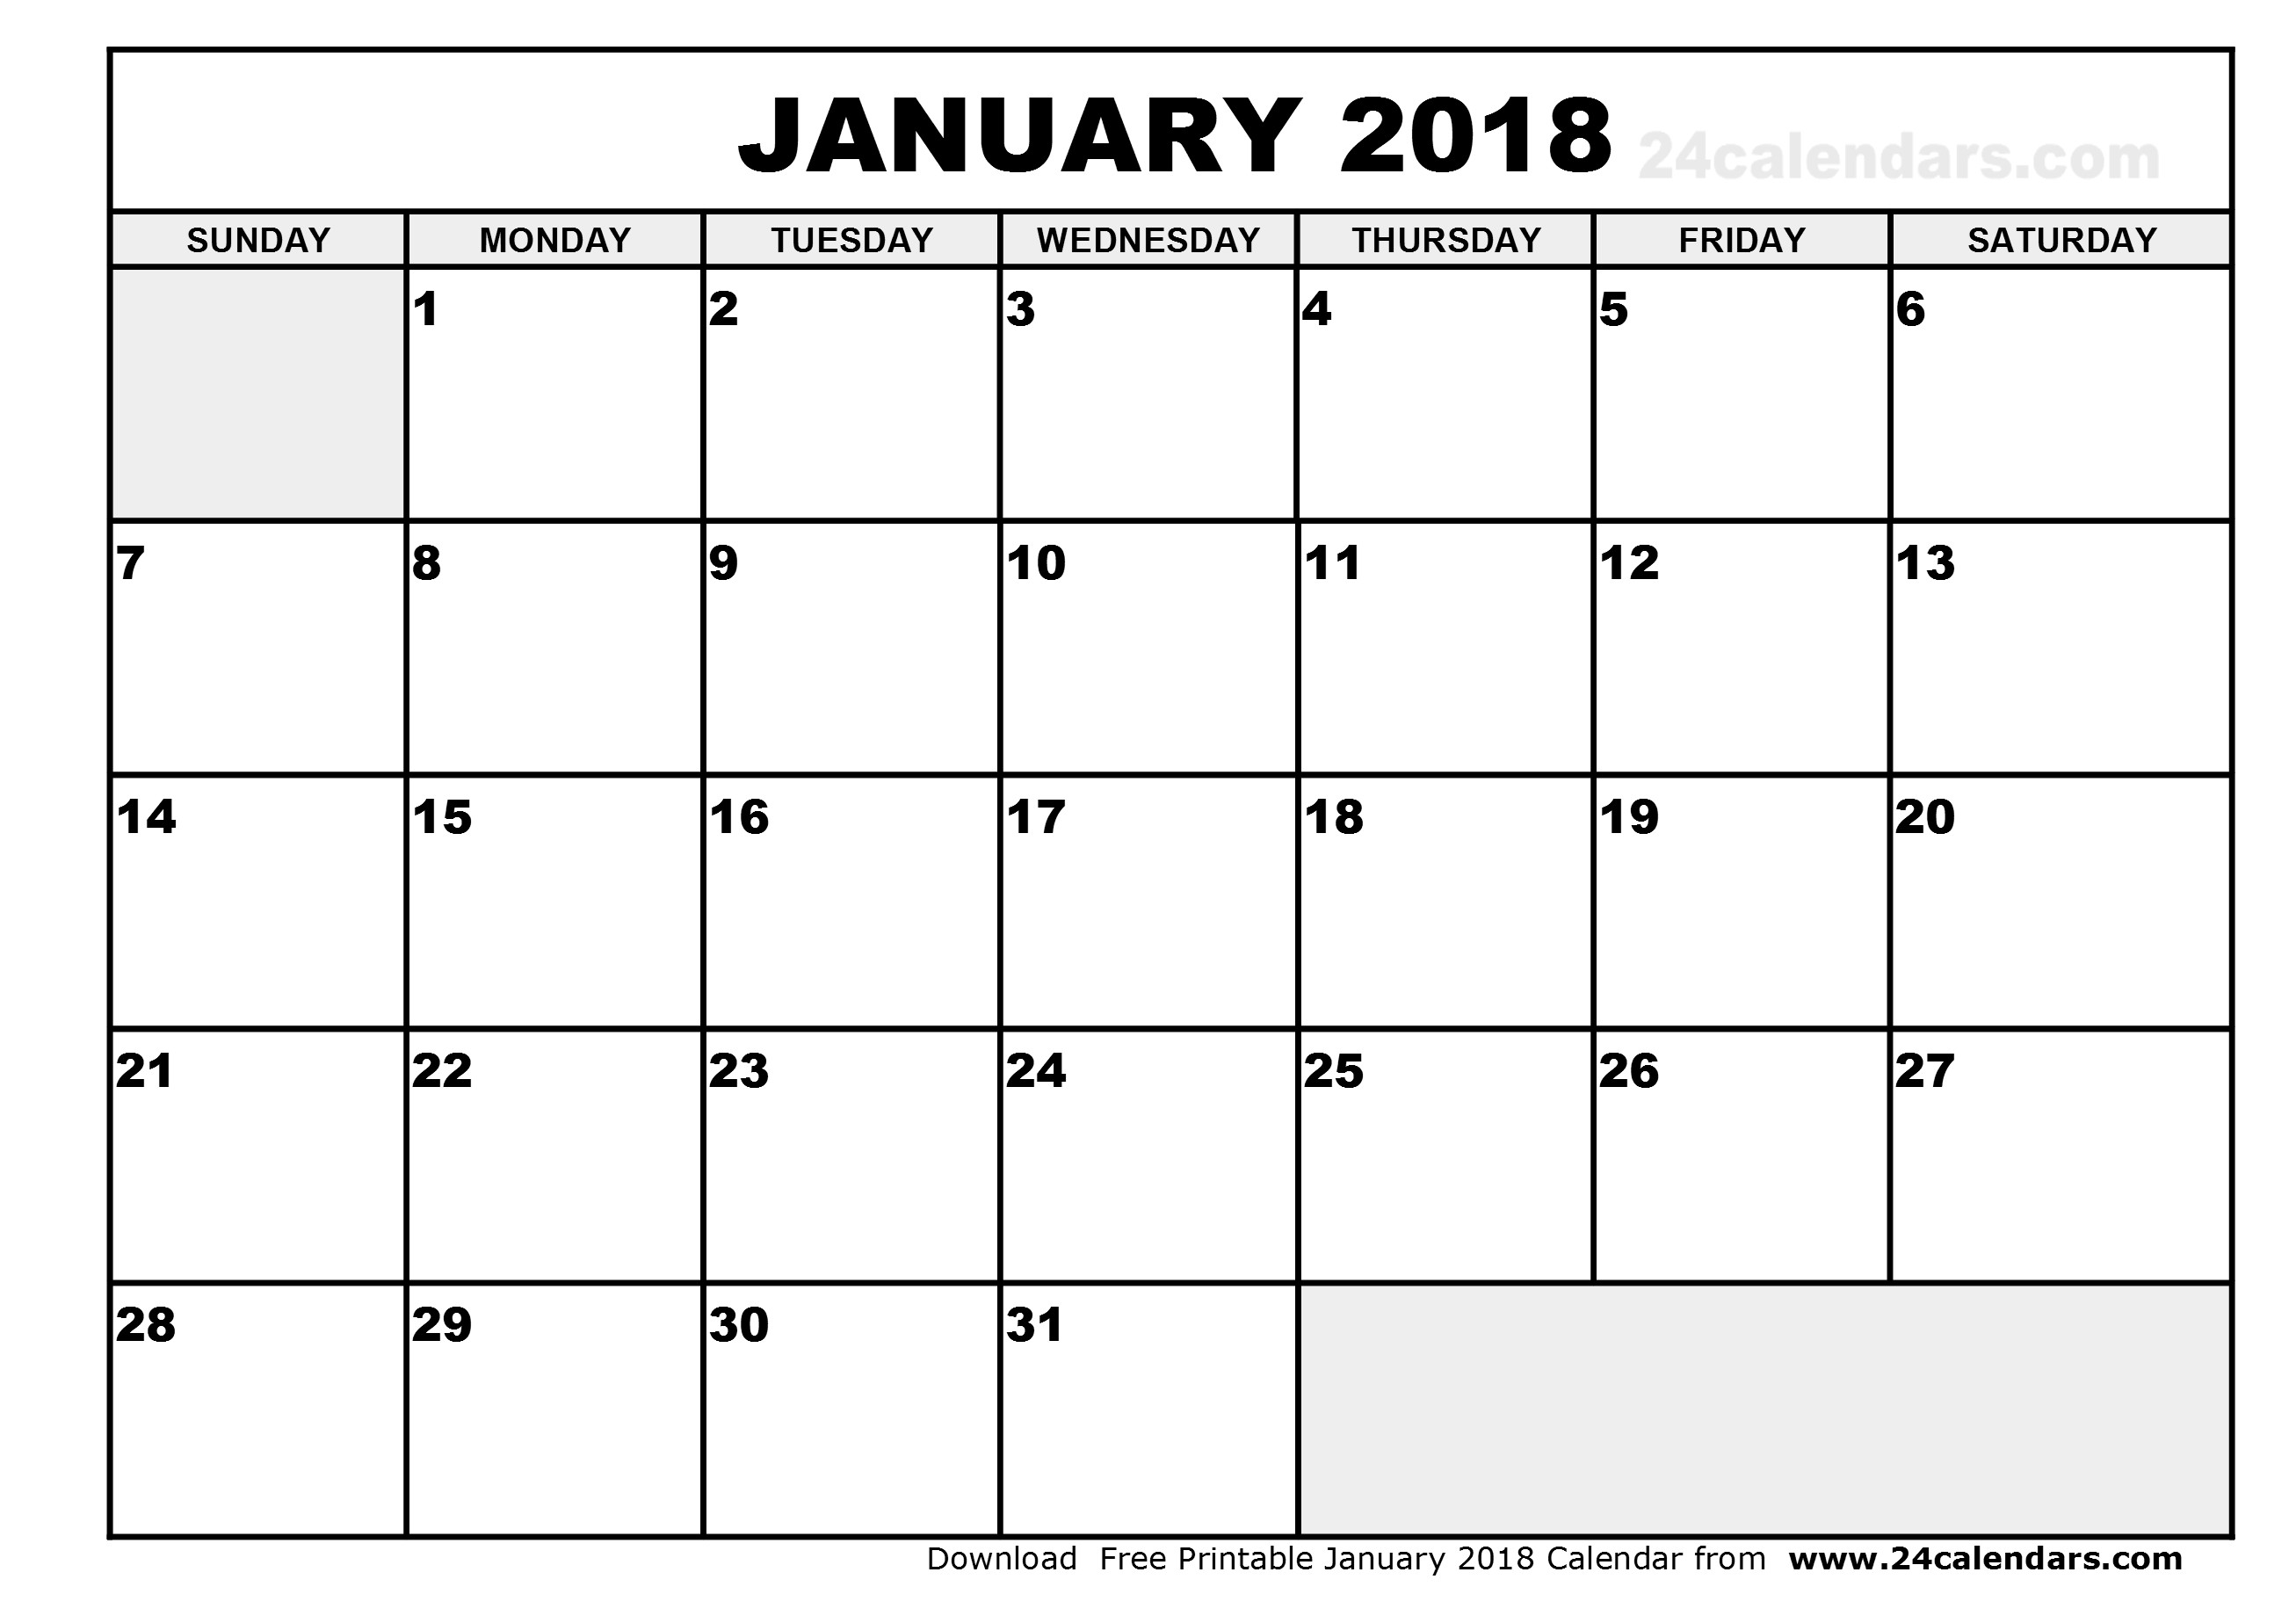 2613x1847 February 2018 Calendars for Word, Excel & PDF